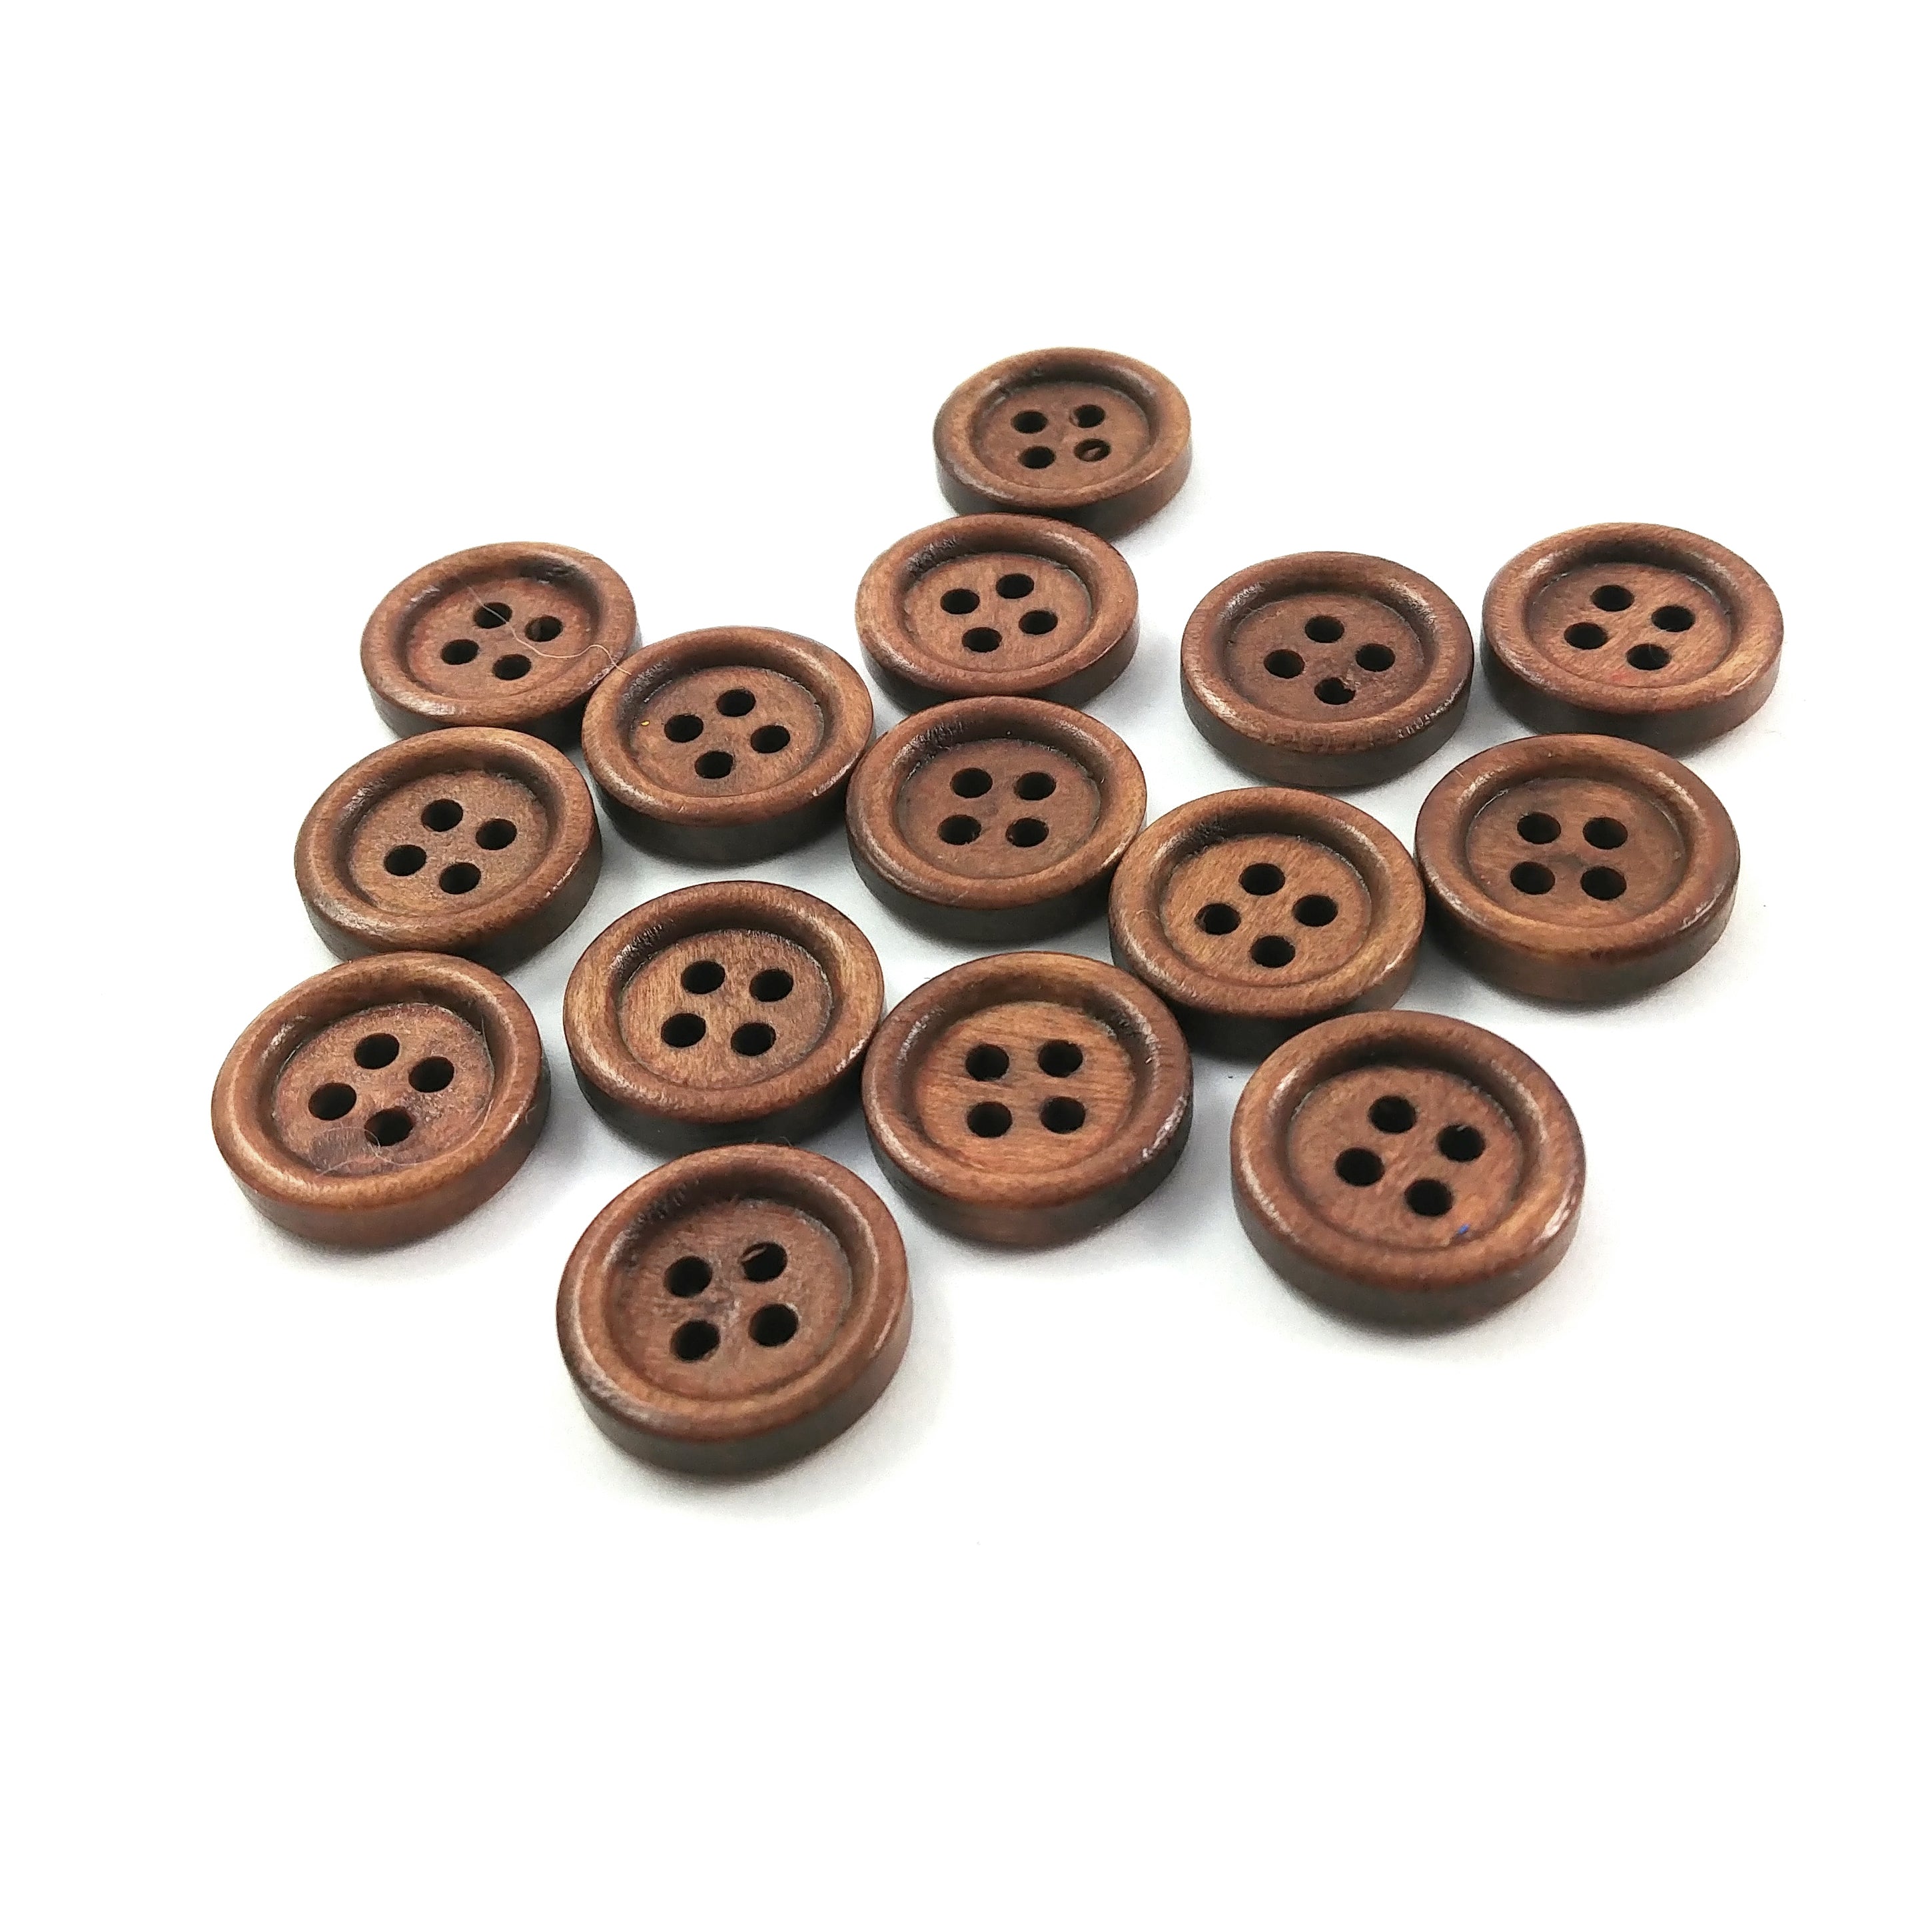 Wood button - Brown 4 Holes Wooden Sewing Buttons 15mm - set of 15